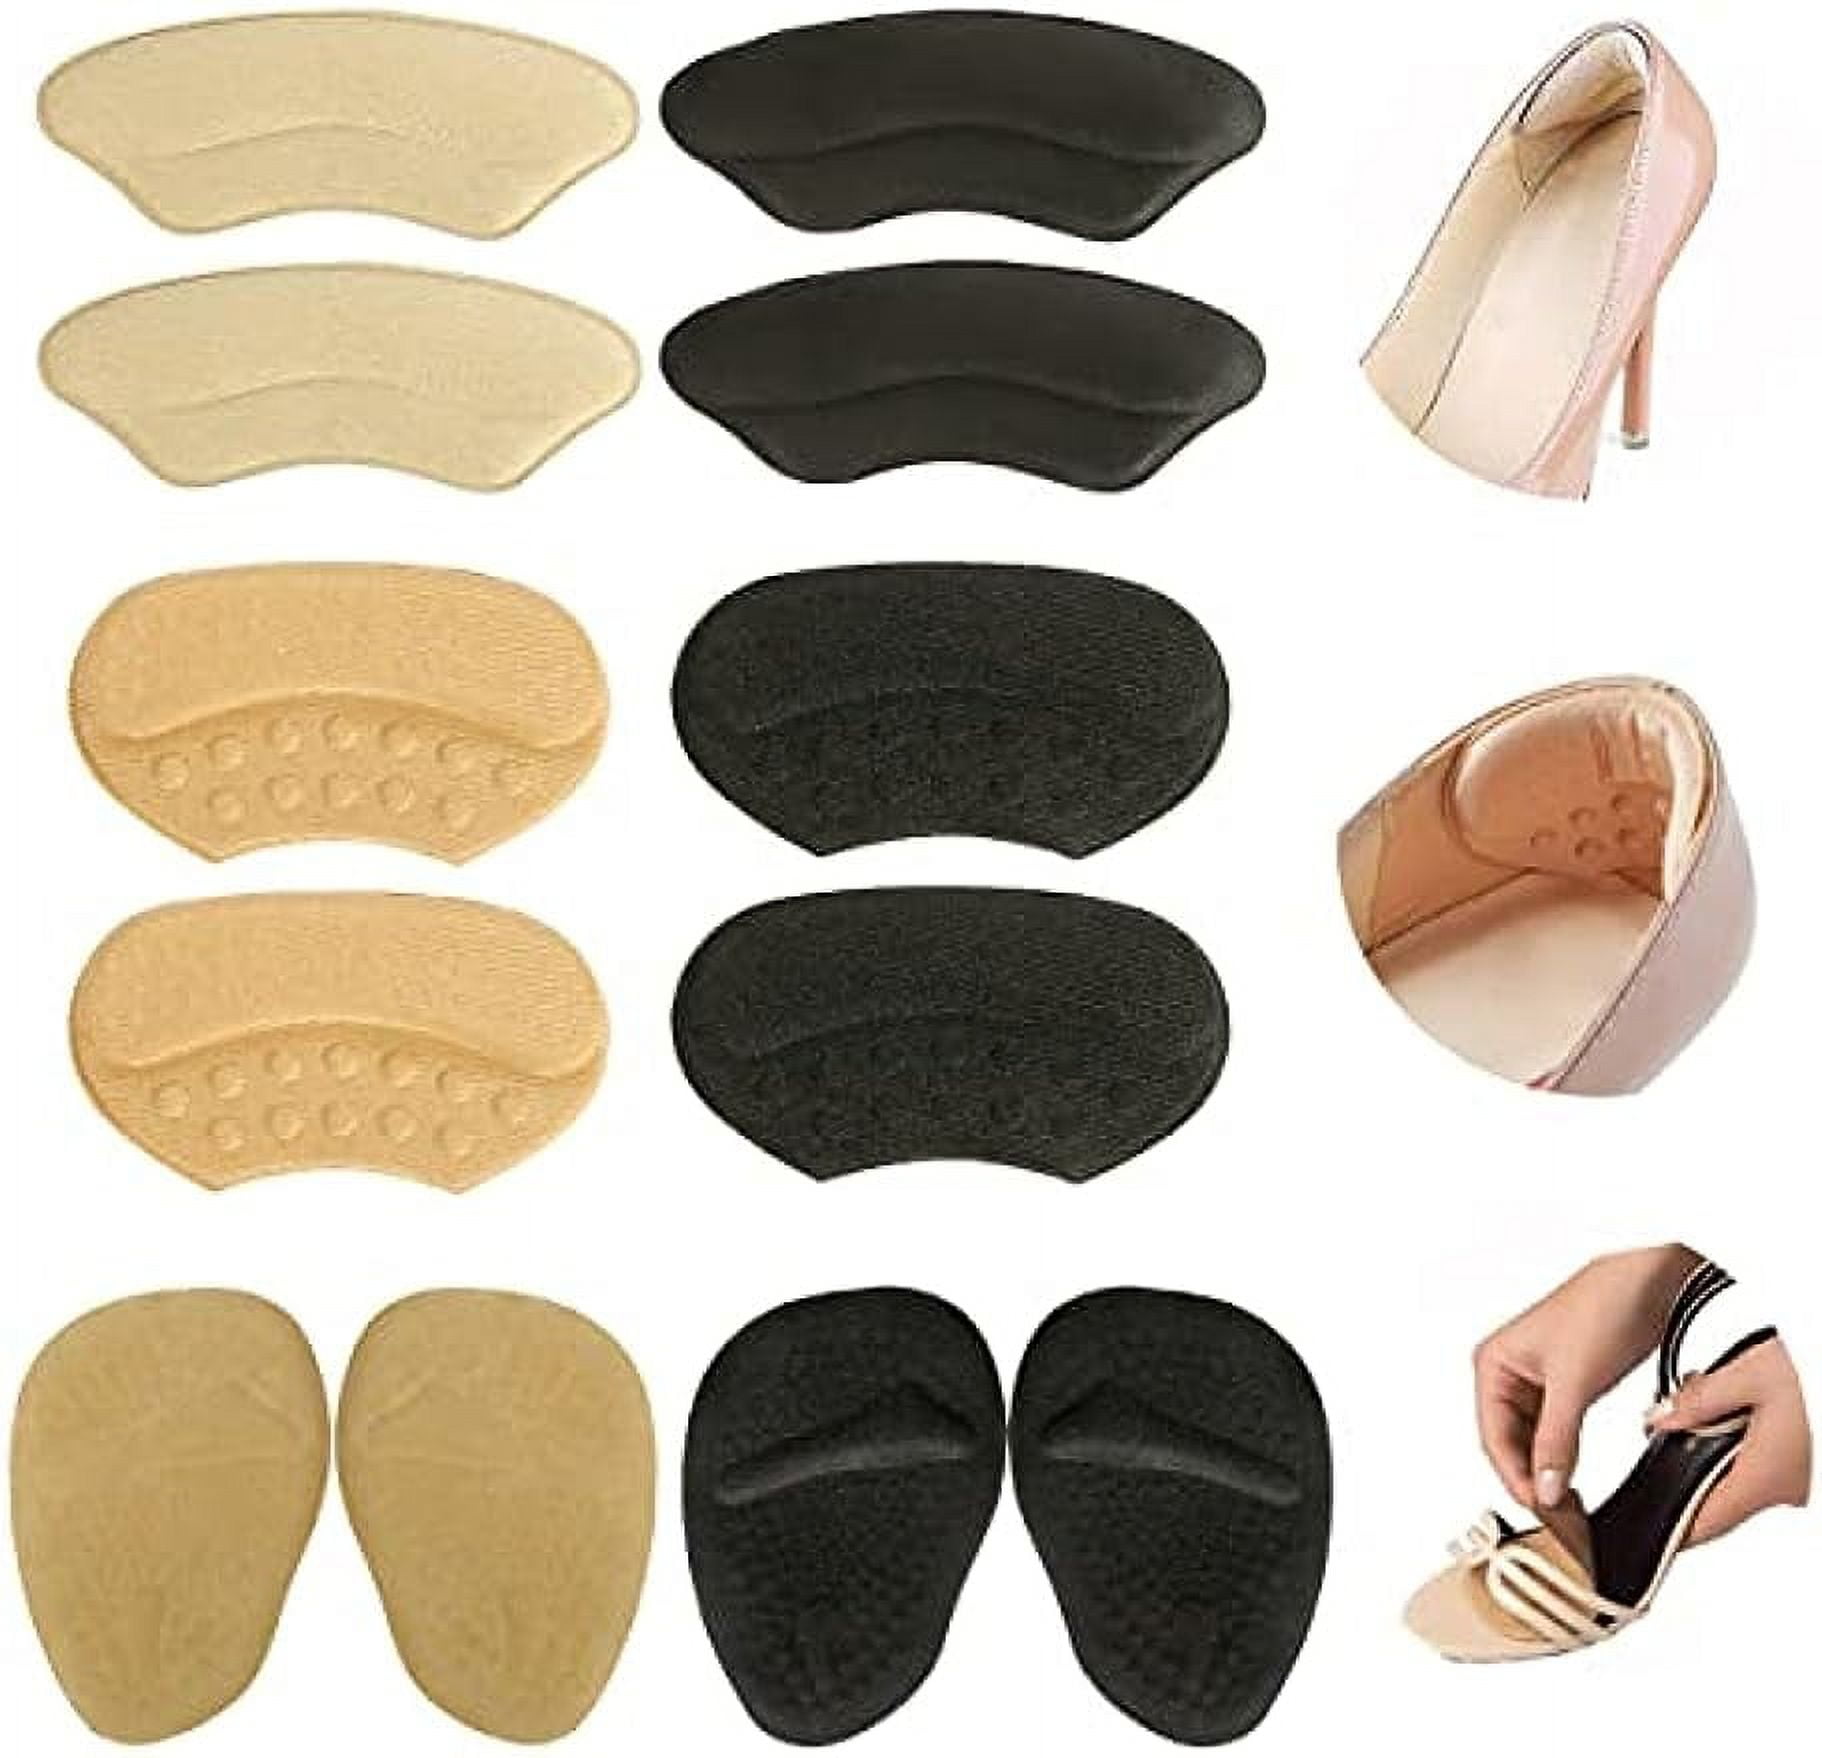 Heel Grips for Womens Shoes That are Too Big,Heel Cushion Inserts for Women  for Loose Shoes,Heel Pads for Shoes Heel Protectors,Shoe Filler to Make  Shoes Fit Tighter. (Black,3 Pairs) - Walmart.com